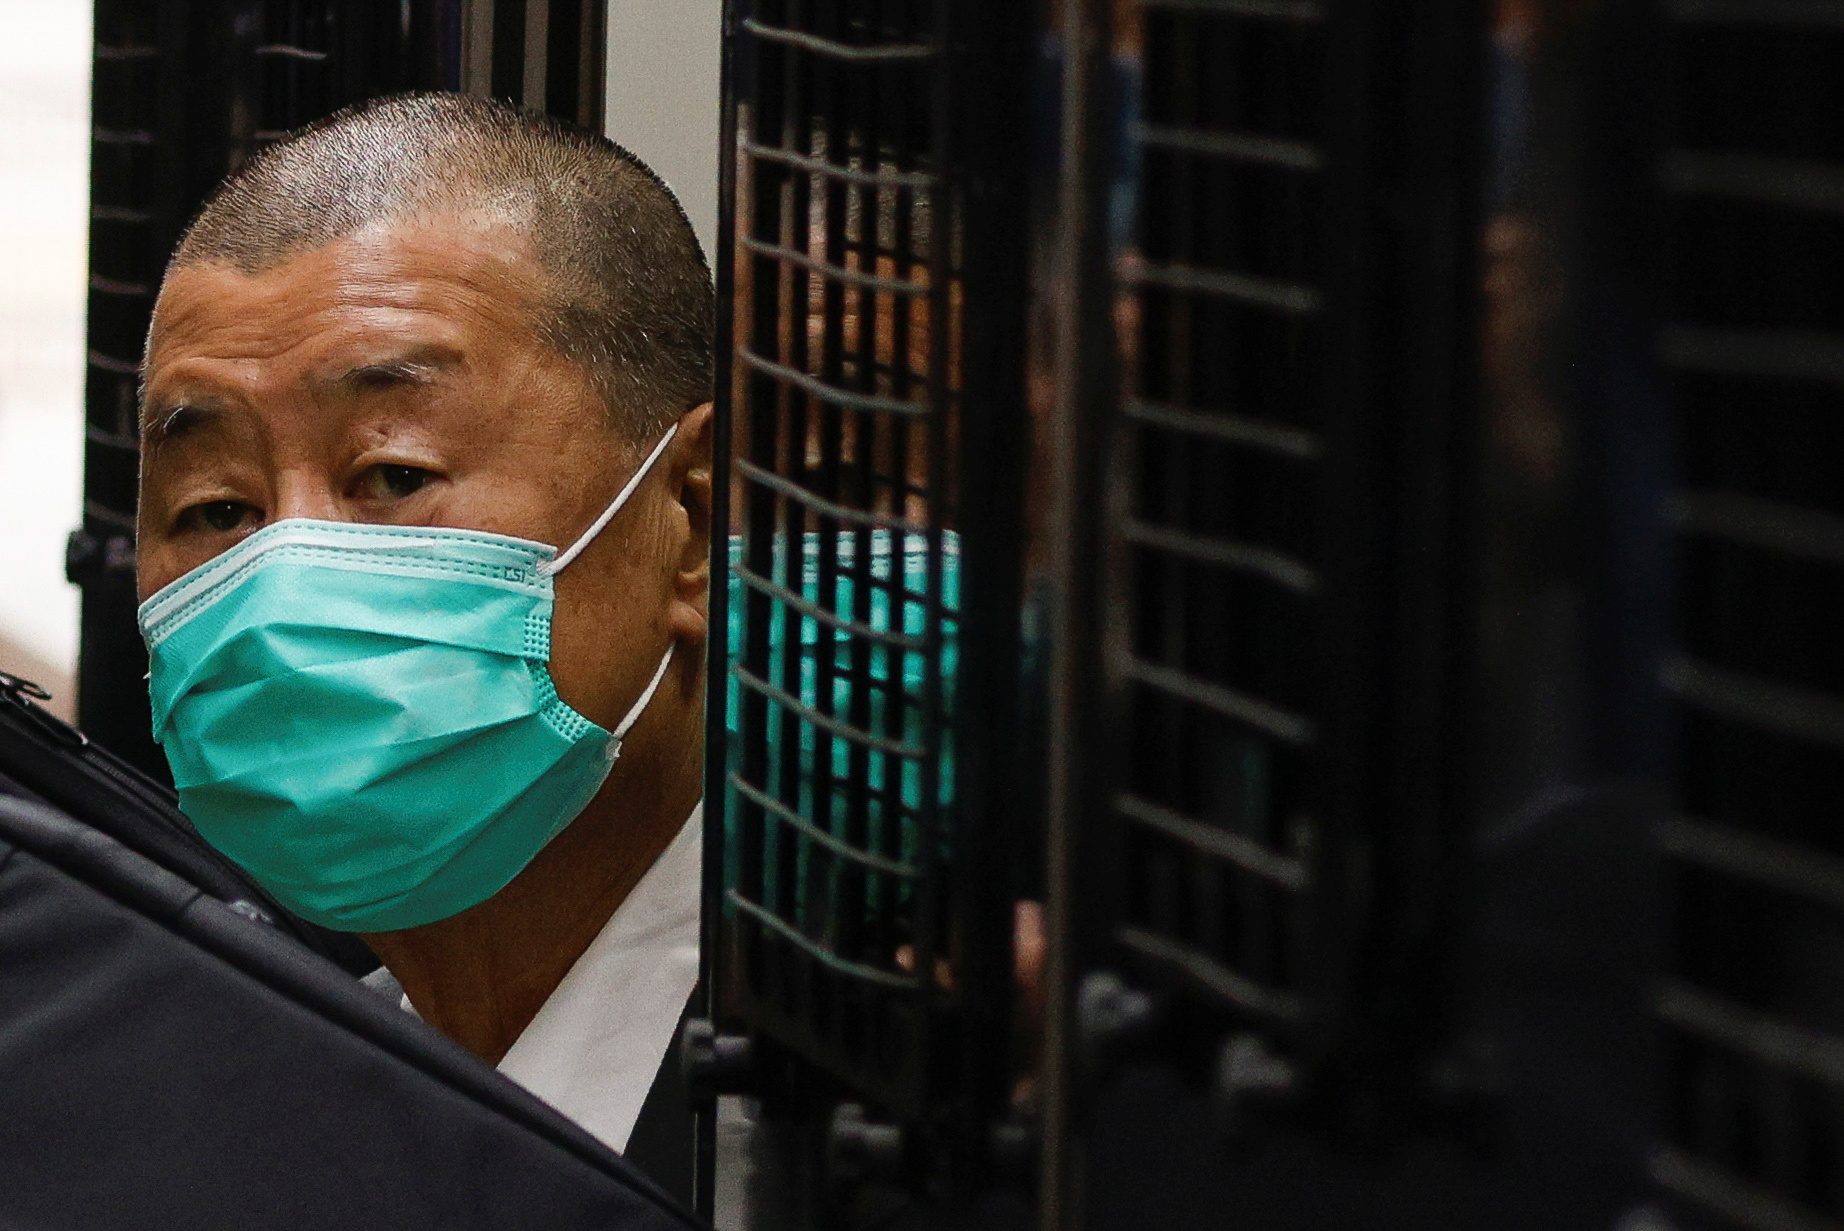 Hong Kong’s descent to ‘where everybody’s scared to speak out’ is a warning to free world